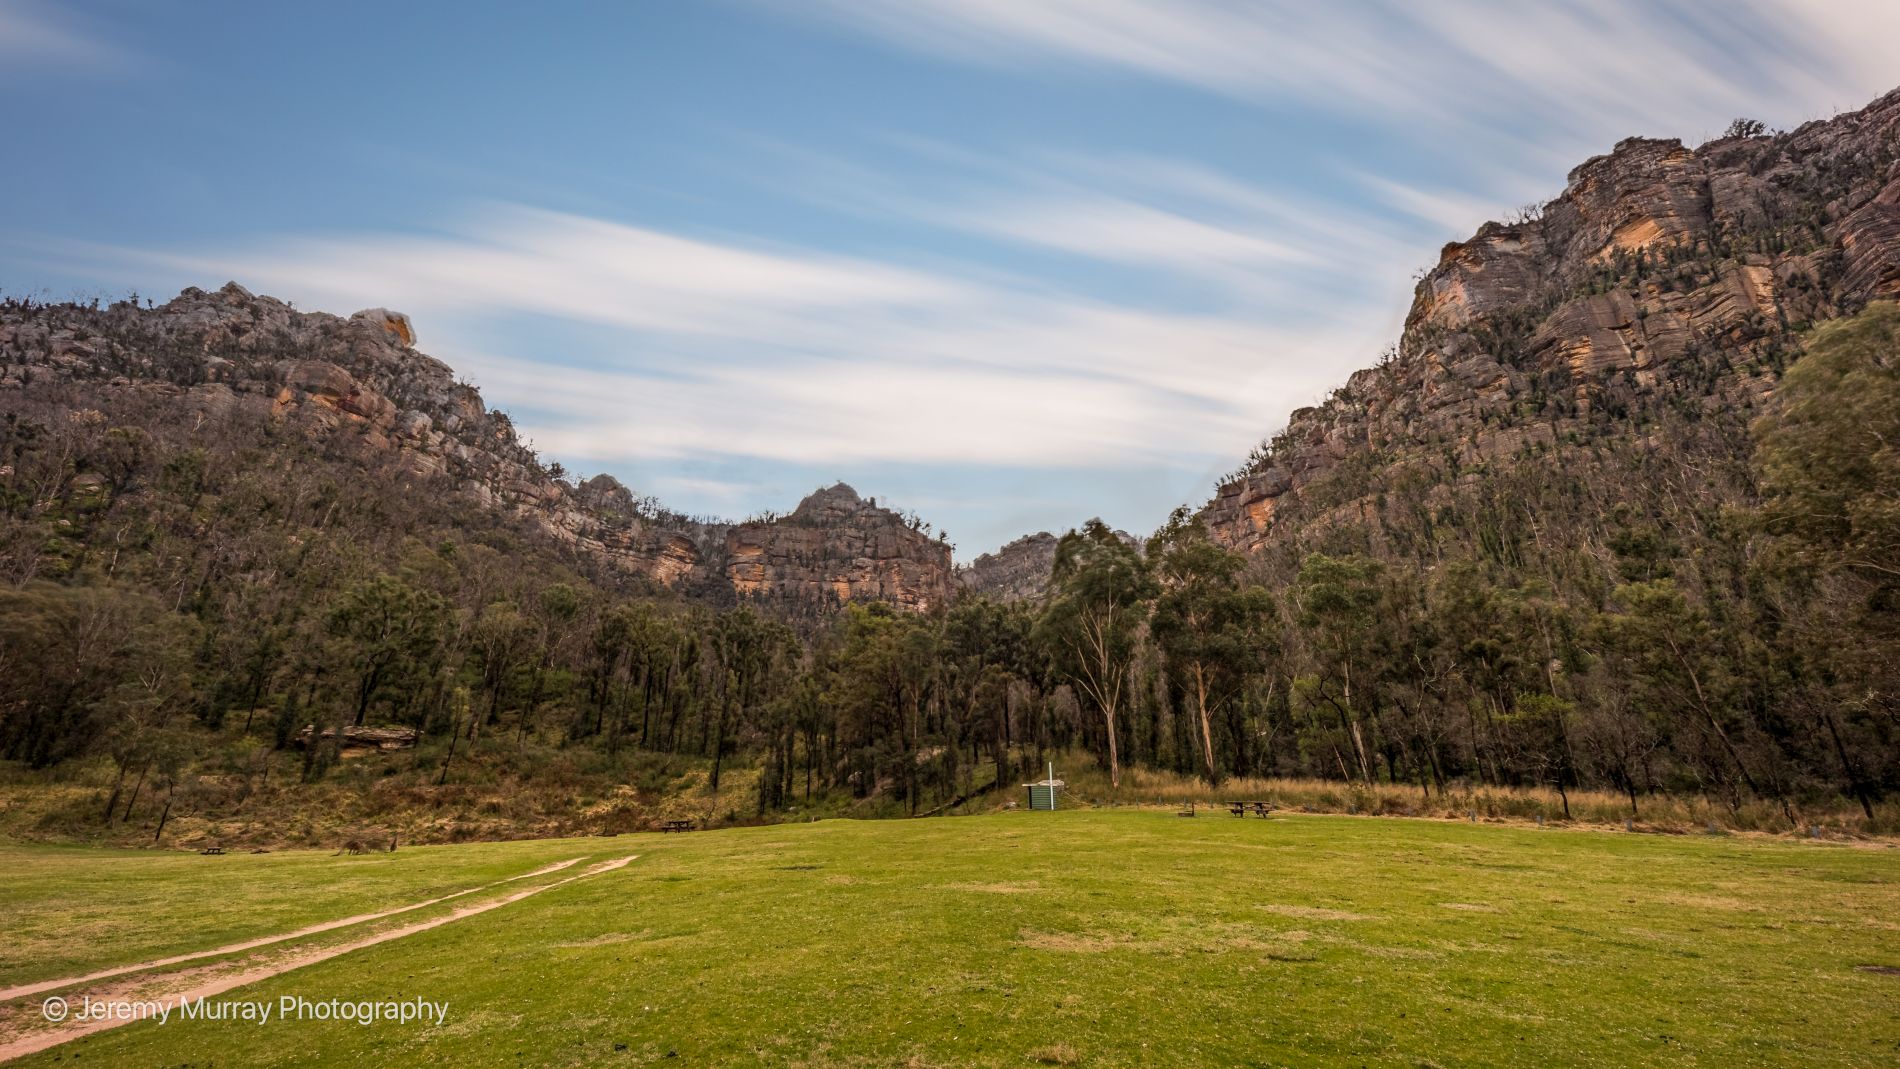 Newnes Campground 2, 2021 | Photo by Jeremy Murray Photography